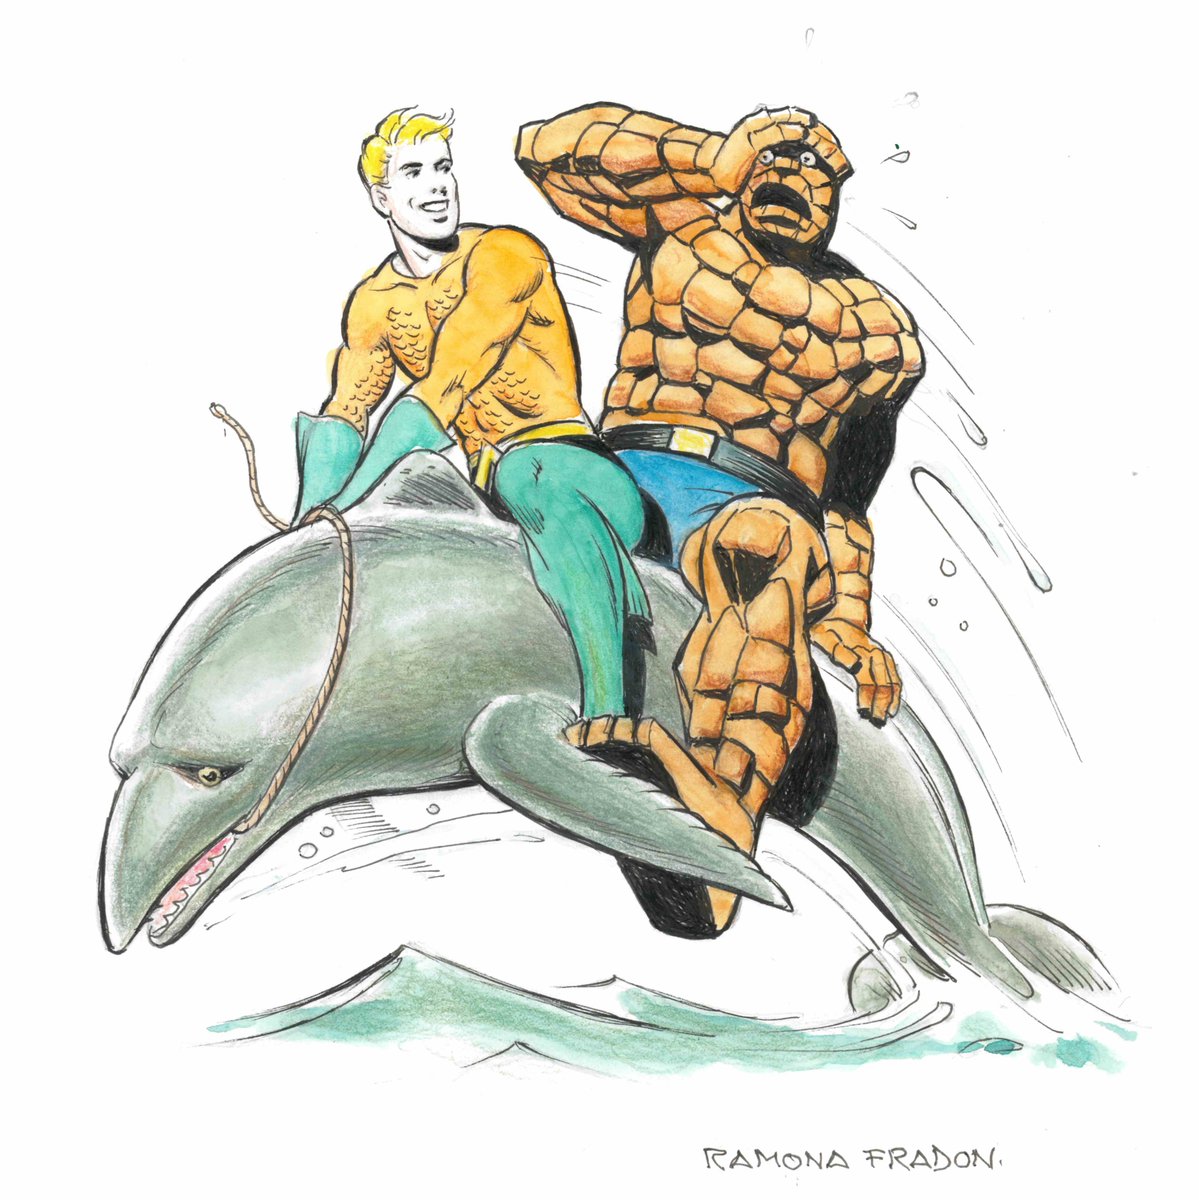 Yesterday, I received a commissioned art piece I ordered from #RamonaFradon. The only direction I gave was to ask for a piece featuring #Aquaman and #TheThing/#BenGrimm. Beyond that, I just encouraged her to have fun with the piece. I think she did that, how about you?